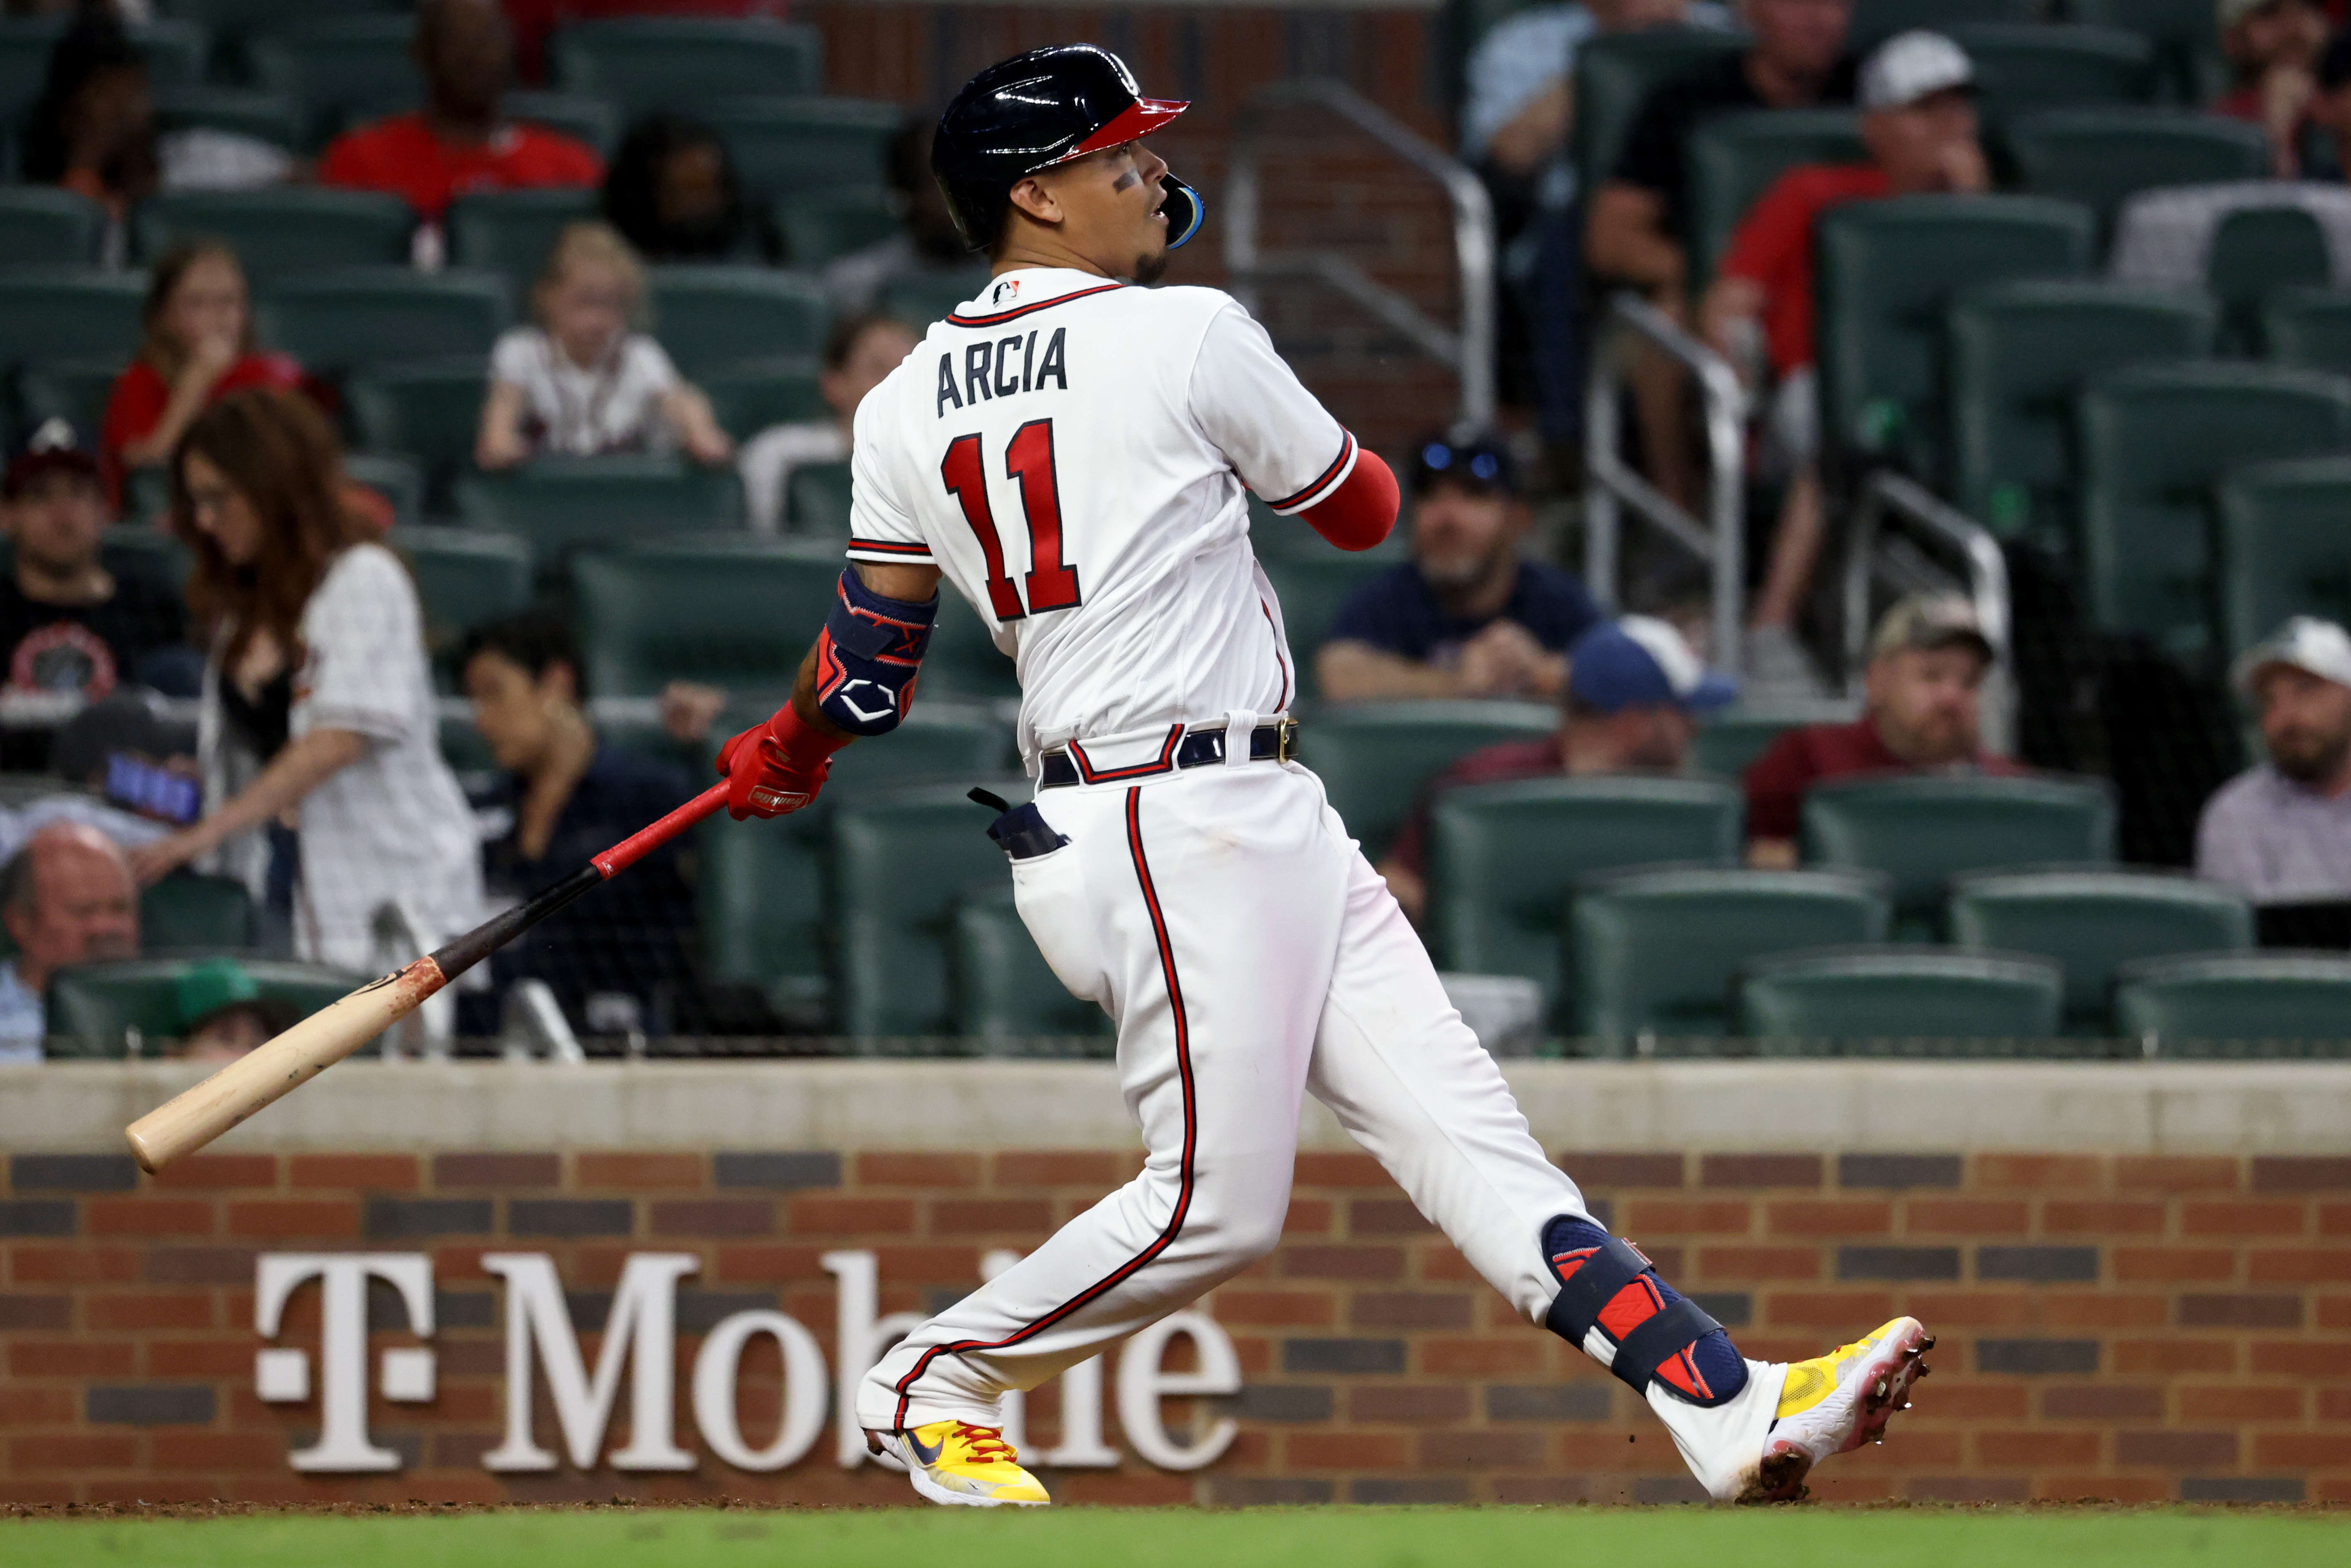 Even teammates have to marvel at Acuña's immense talents, Atlantabraves